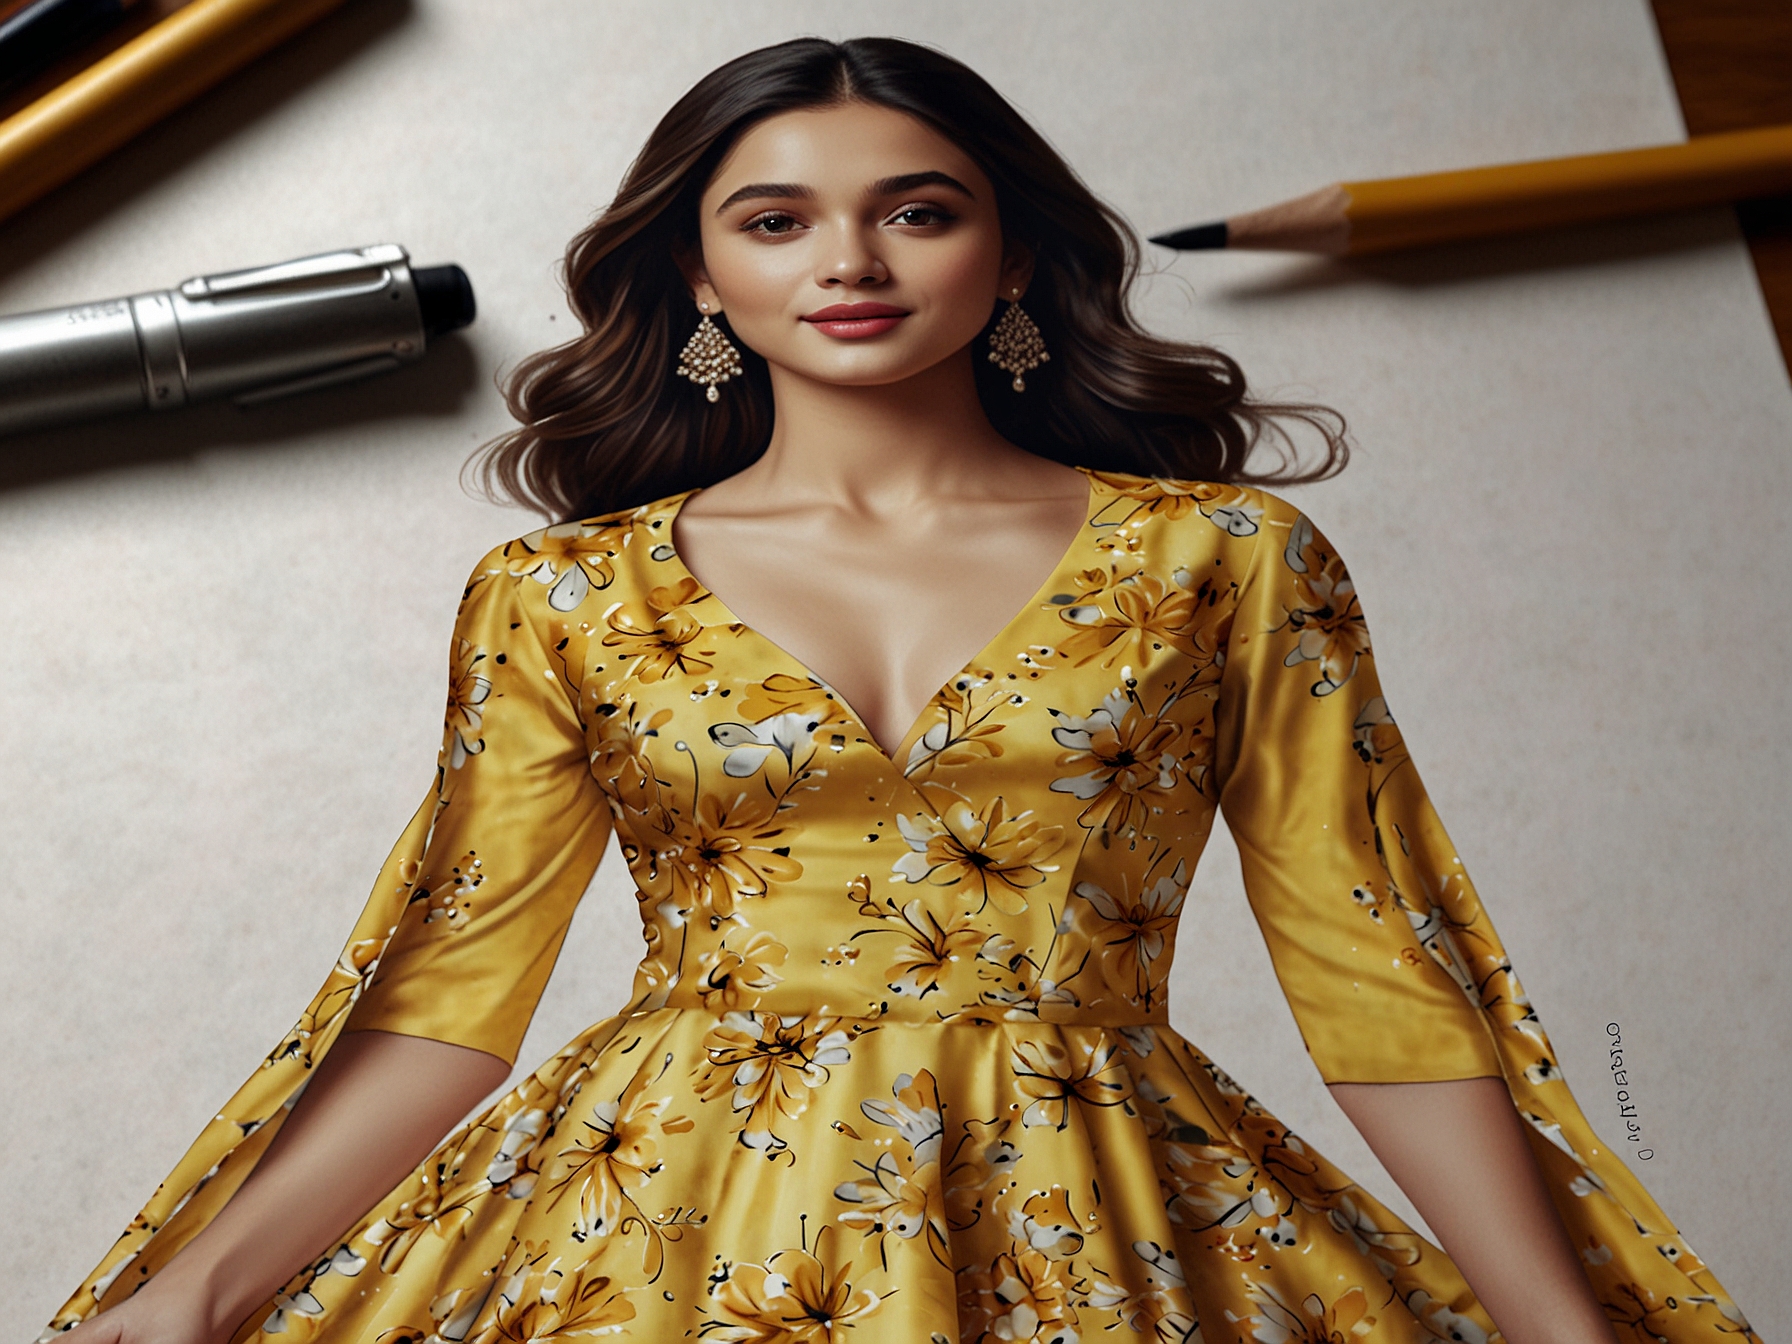 A close-up view of Alia Bhatt's stunning butter yellow floral dress, highlighting its flowing silhouette and intricate floral designs, making a subtle yet striking fashion statement.